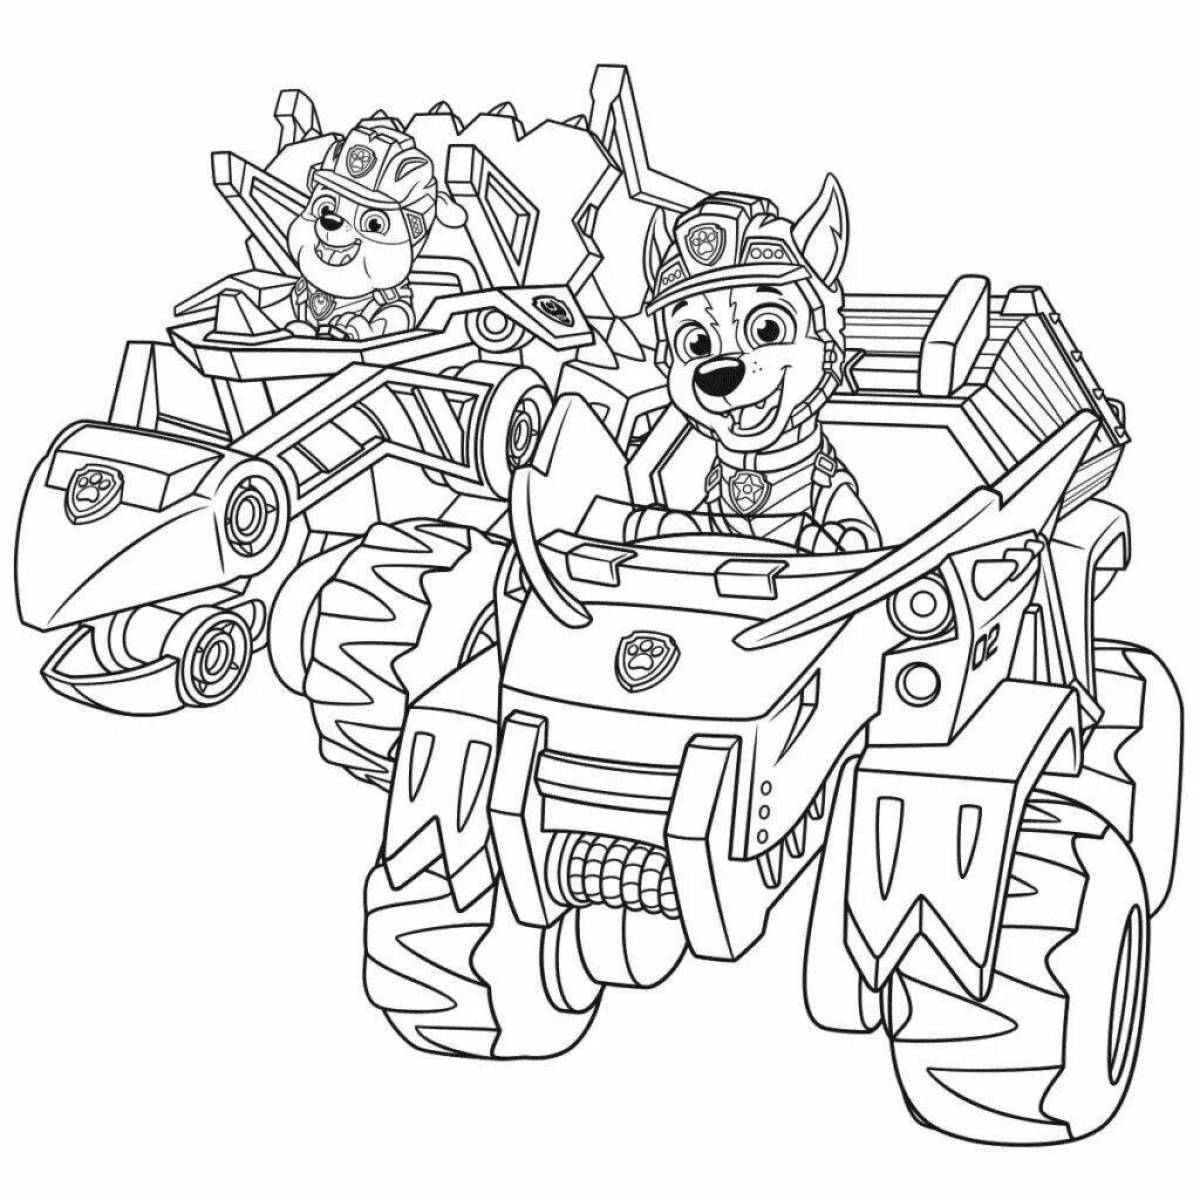 Coloring page funny racer